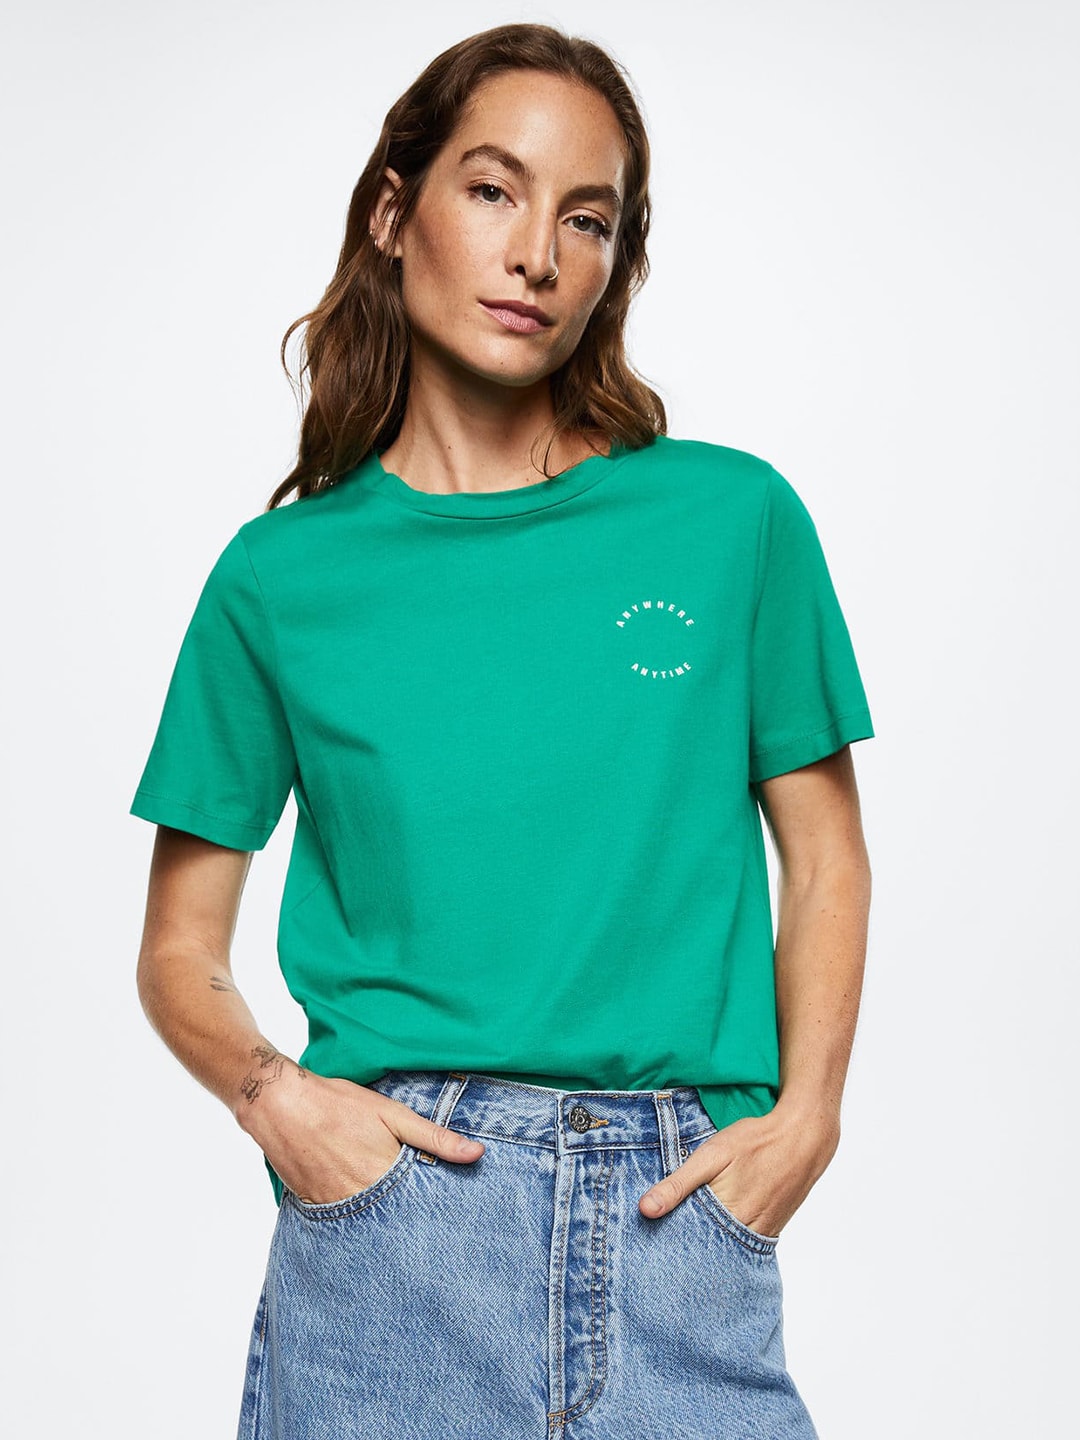 MANGO Women Green Typography Printed Sustainable Pure Cotton T-shirt Price in India